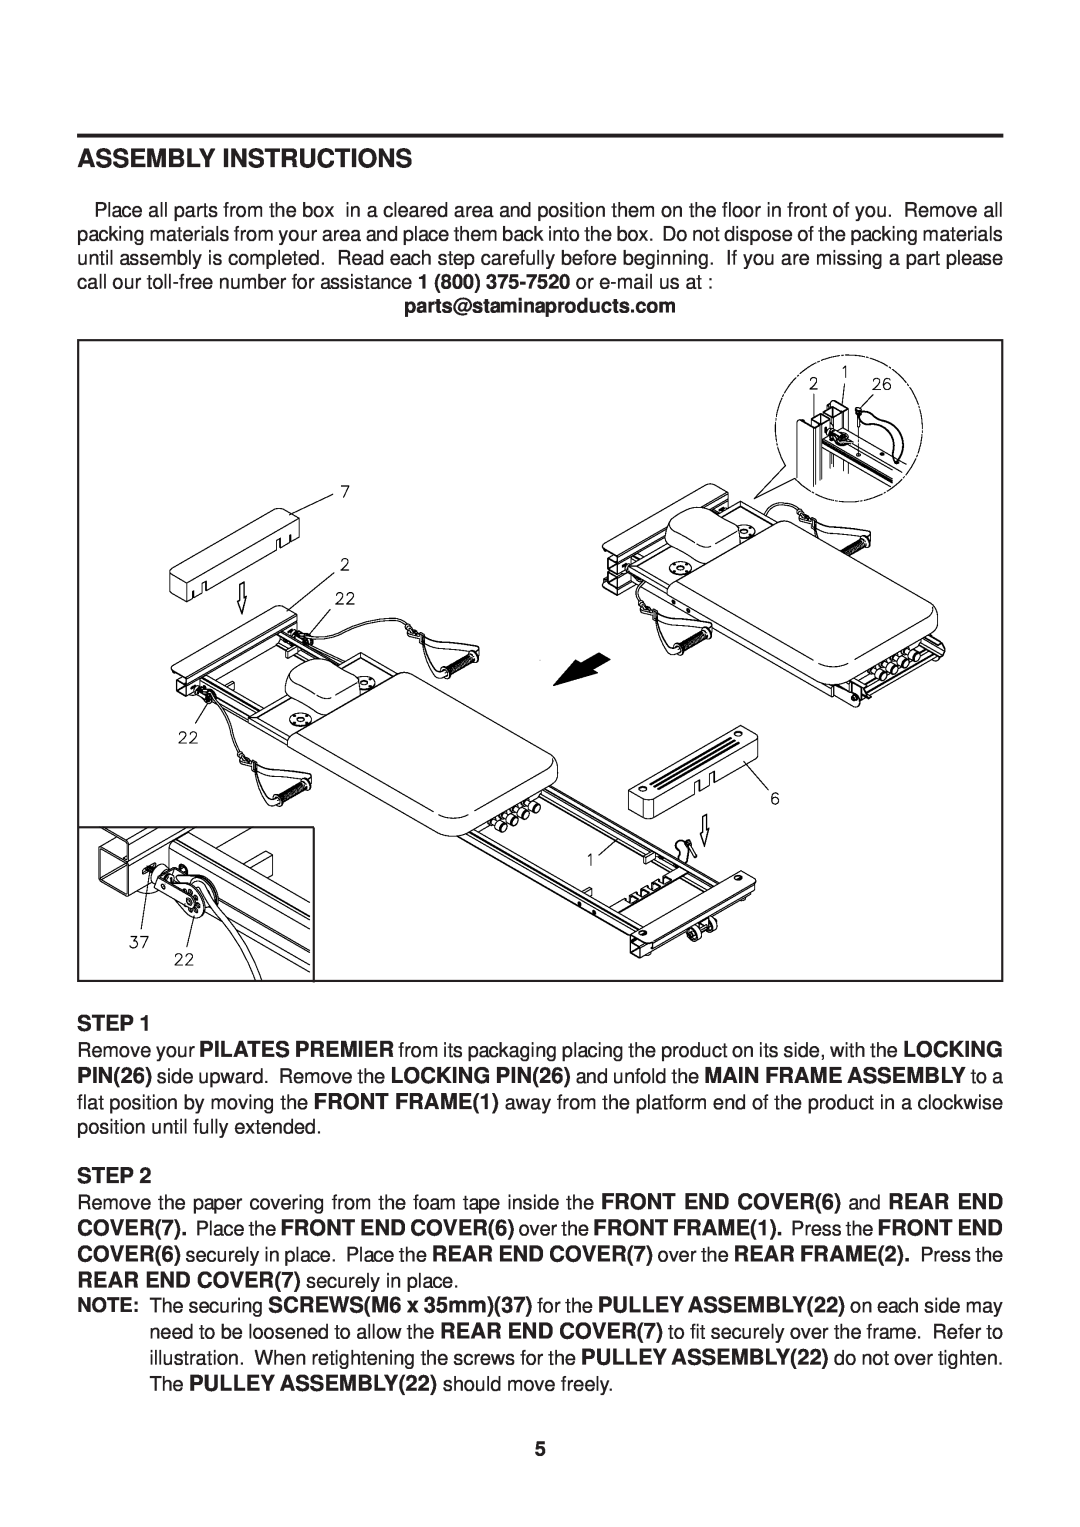 Stamina Products 55-5510 owner manual Assembly Instructions, parts@staminaproducts.com 